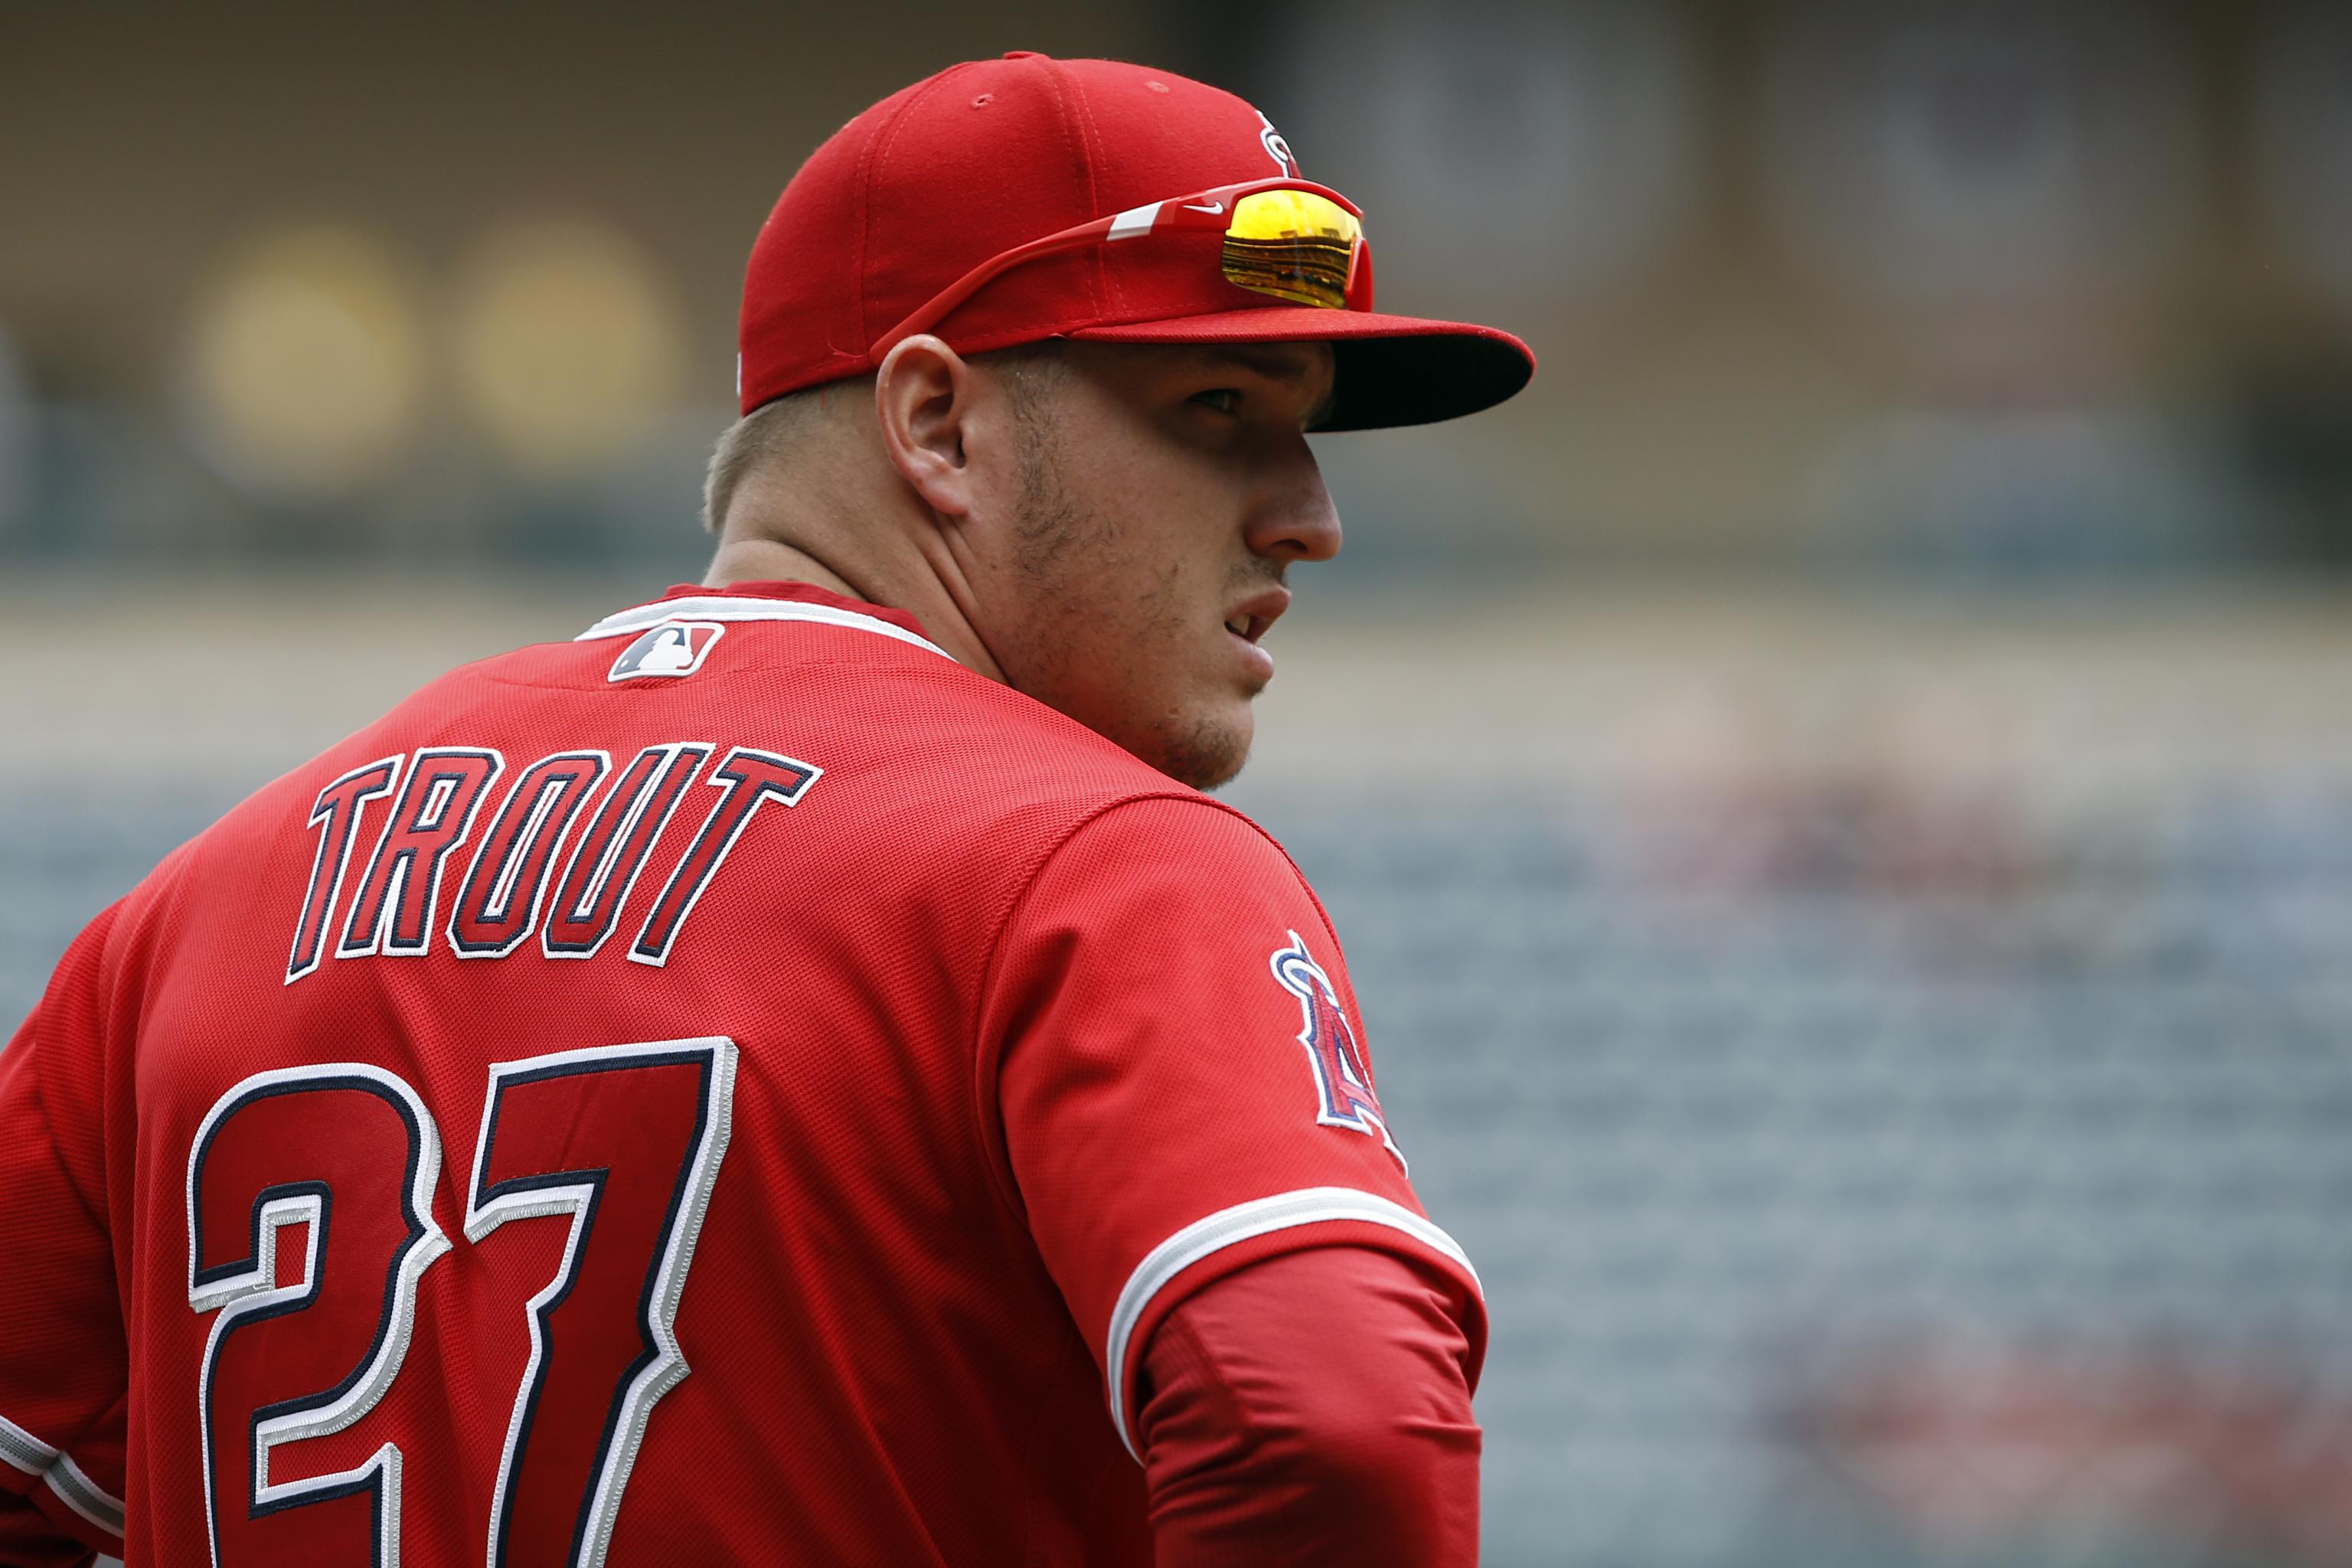 FiveThirtyEight] Mike Trout Is The God Of WAR : r/baseball